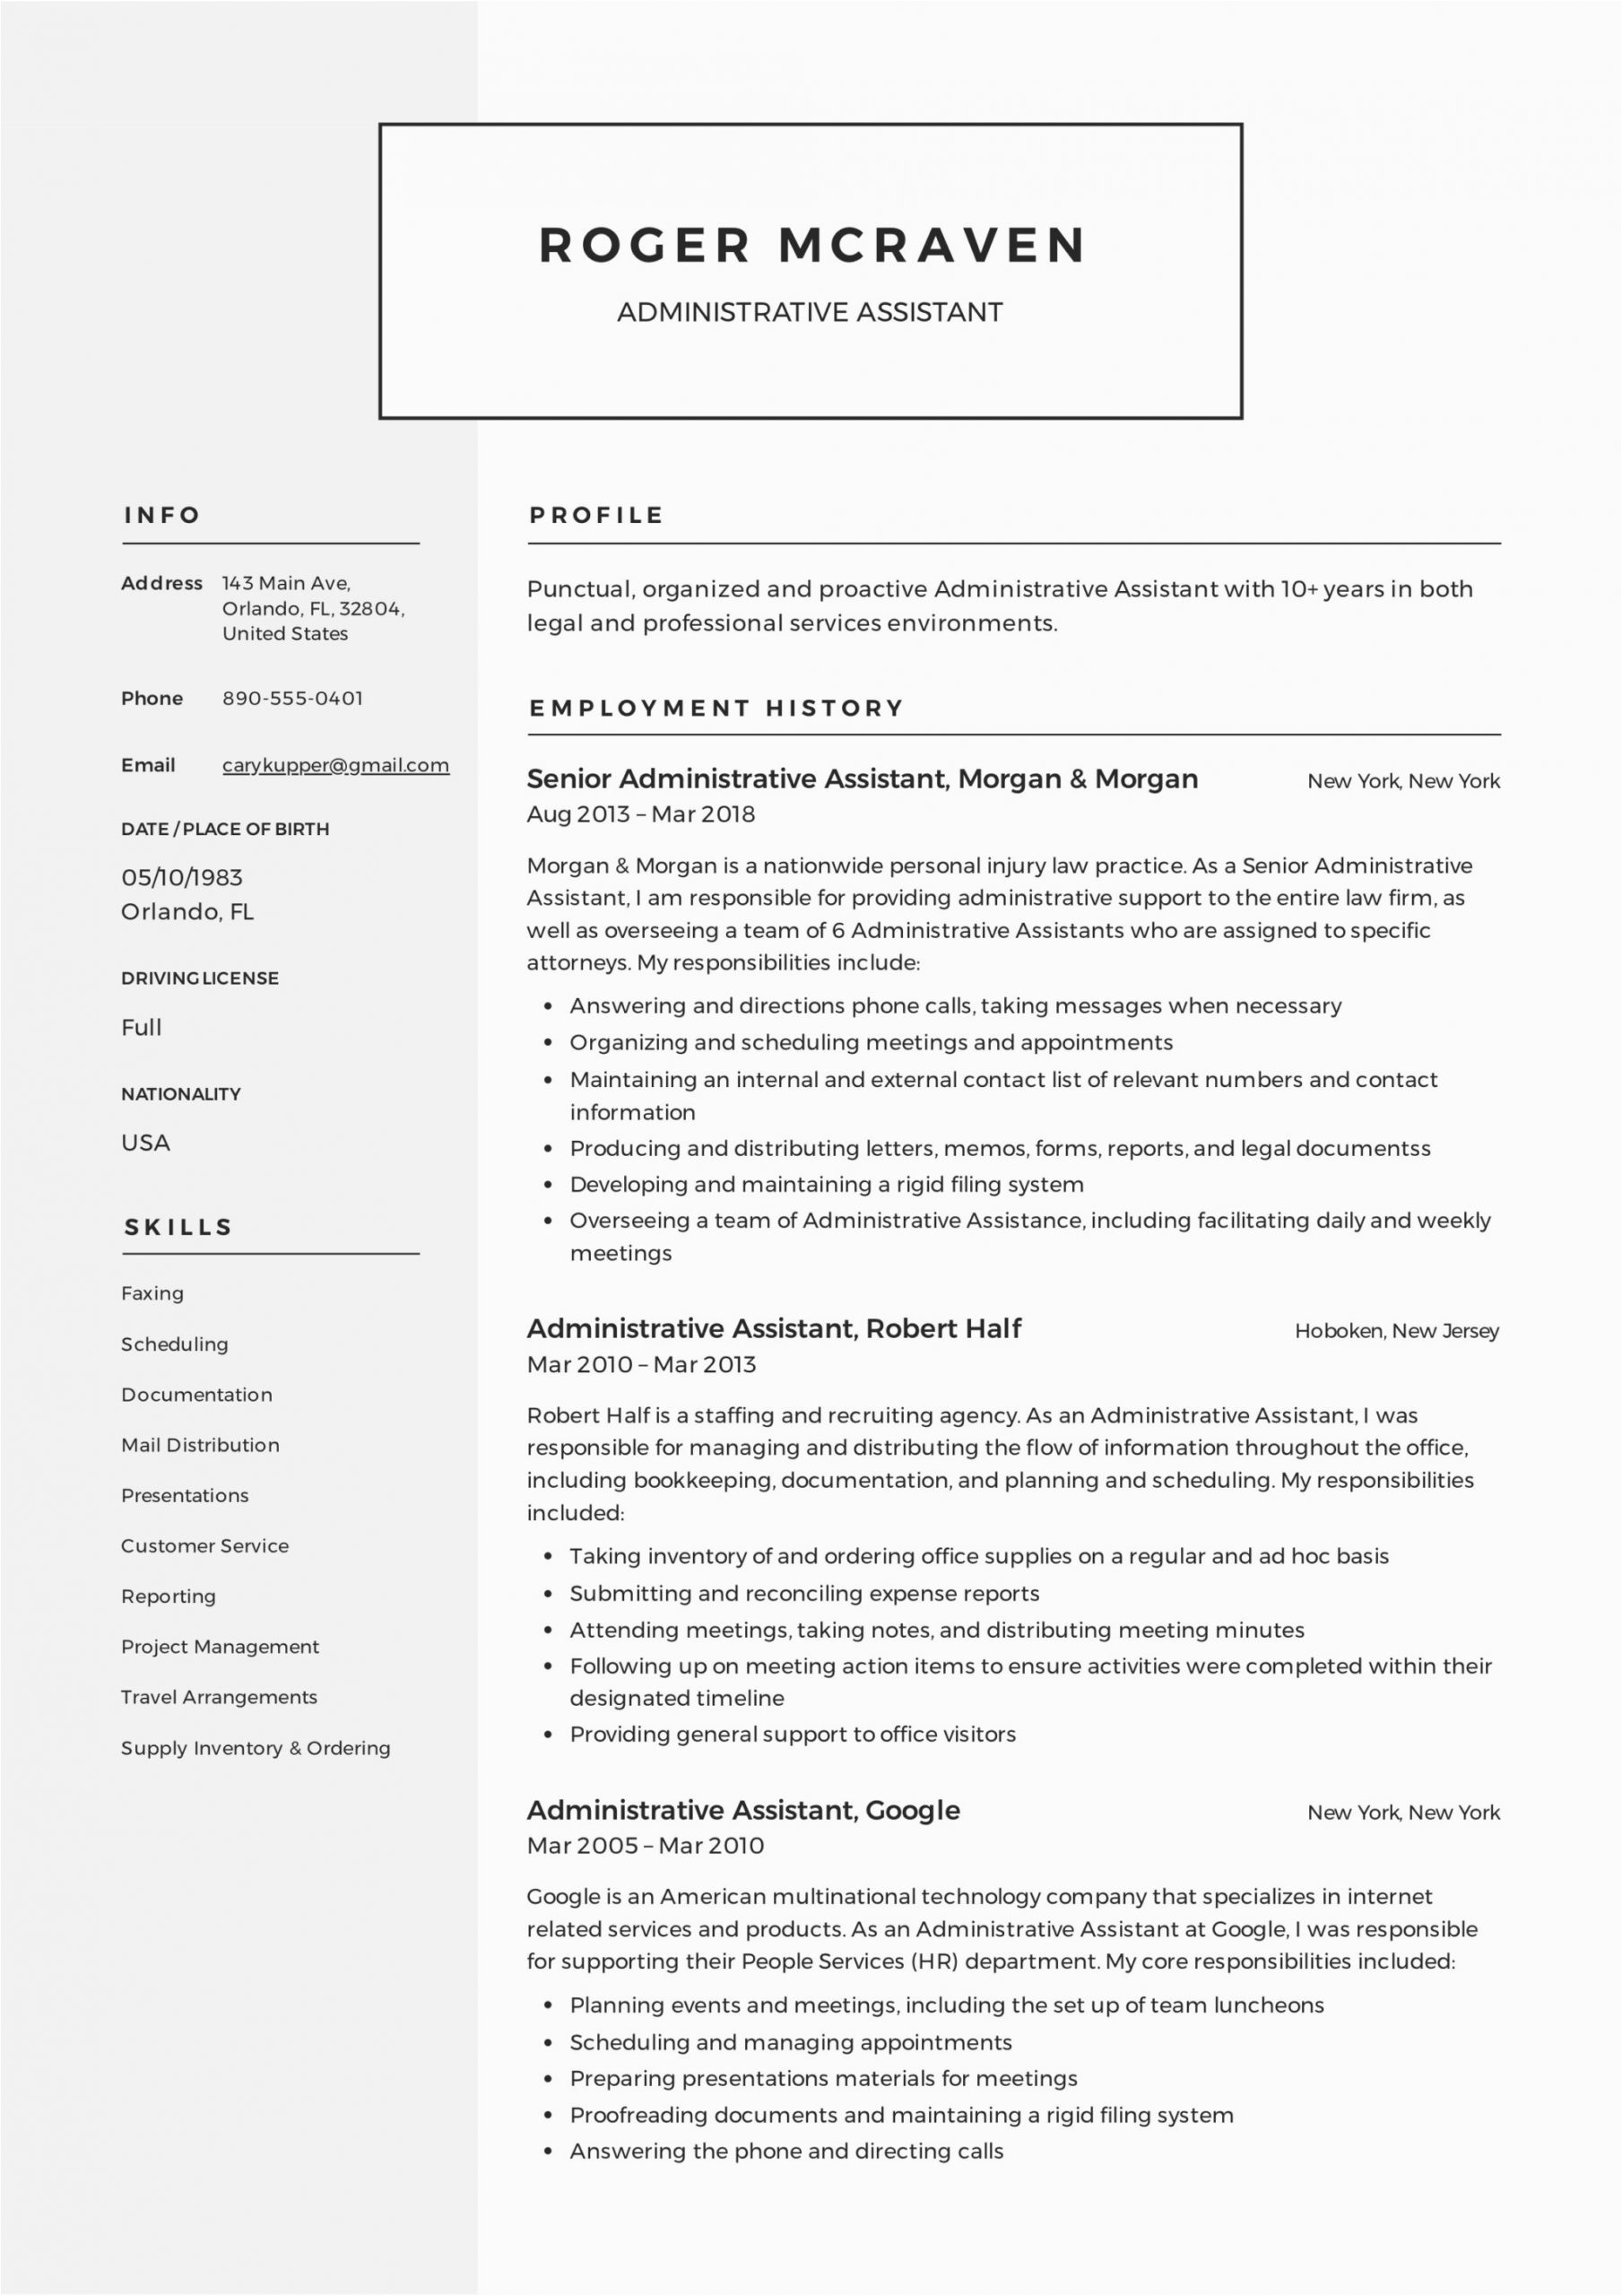 Sample Resume Templates for Administrative assistant 19 Free Administrative assistant Resumes & Writing Guide